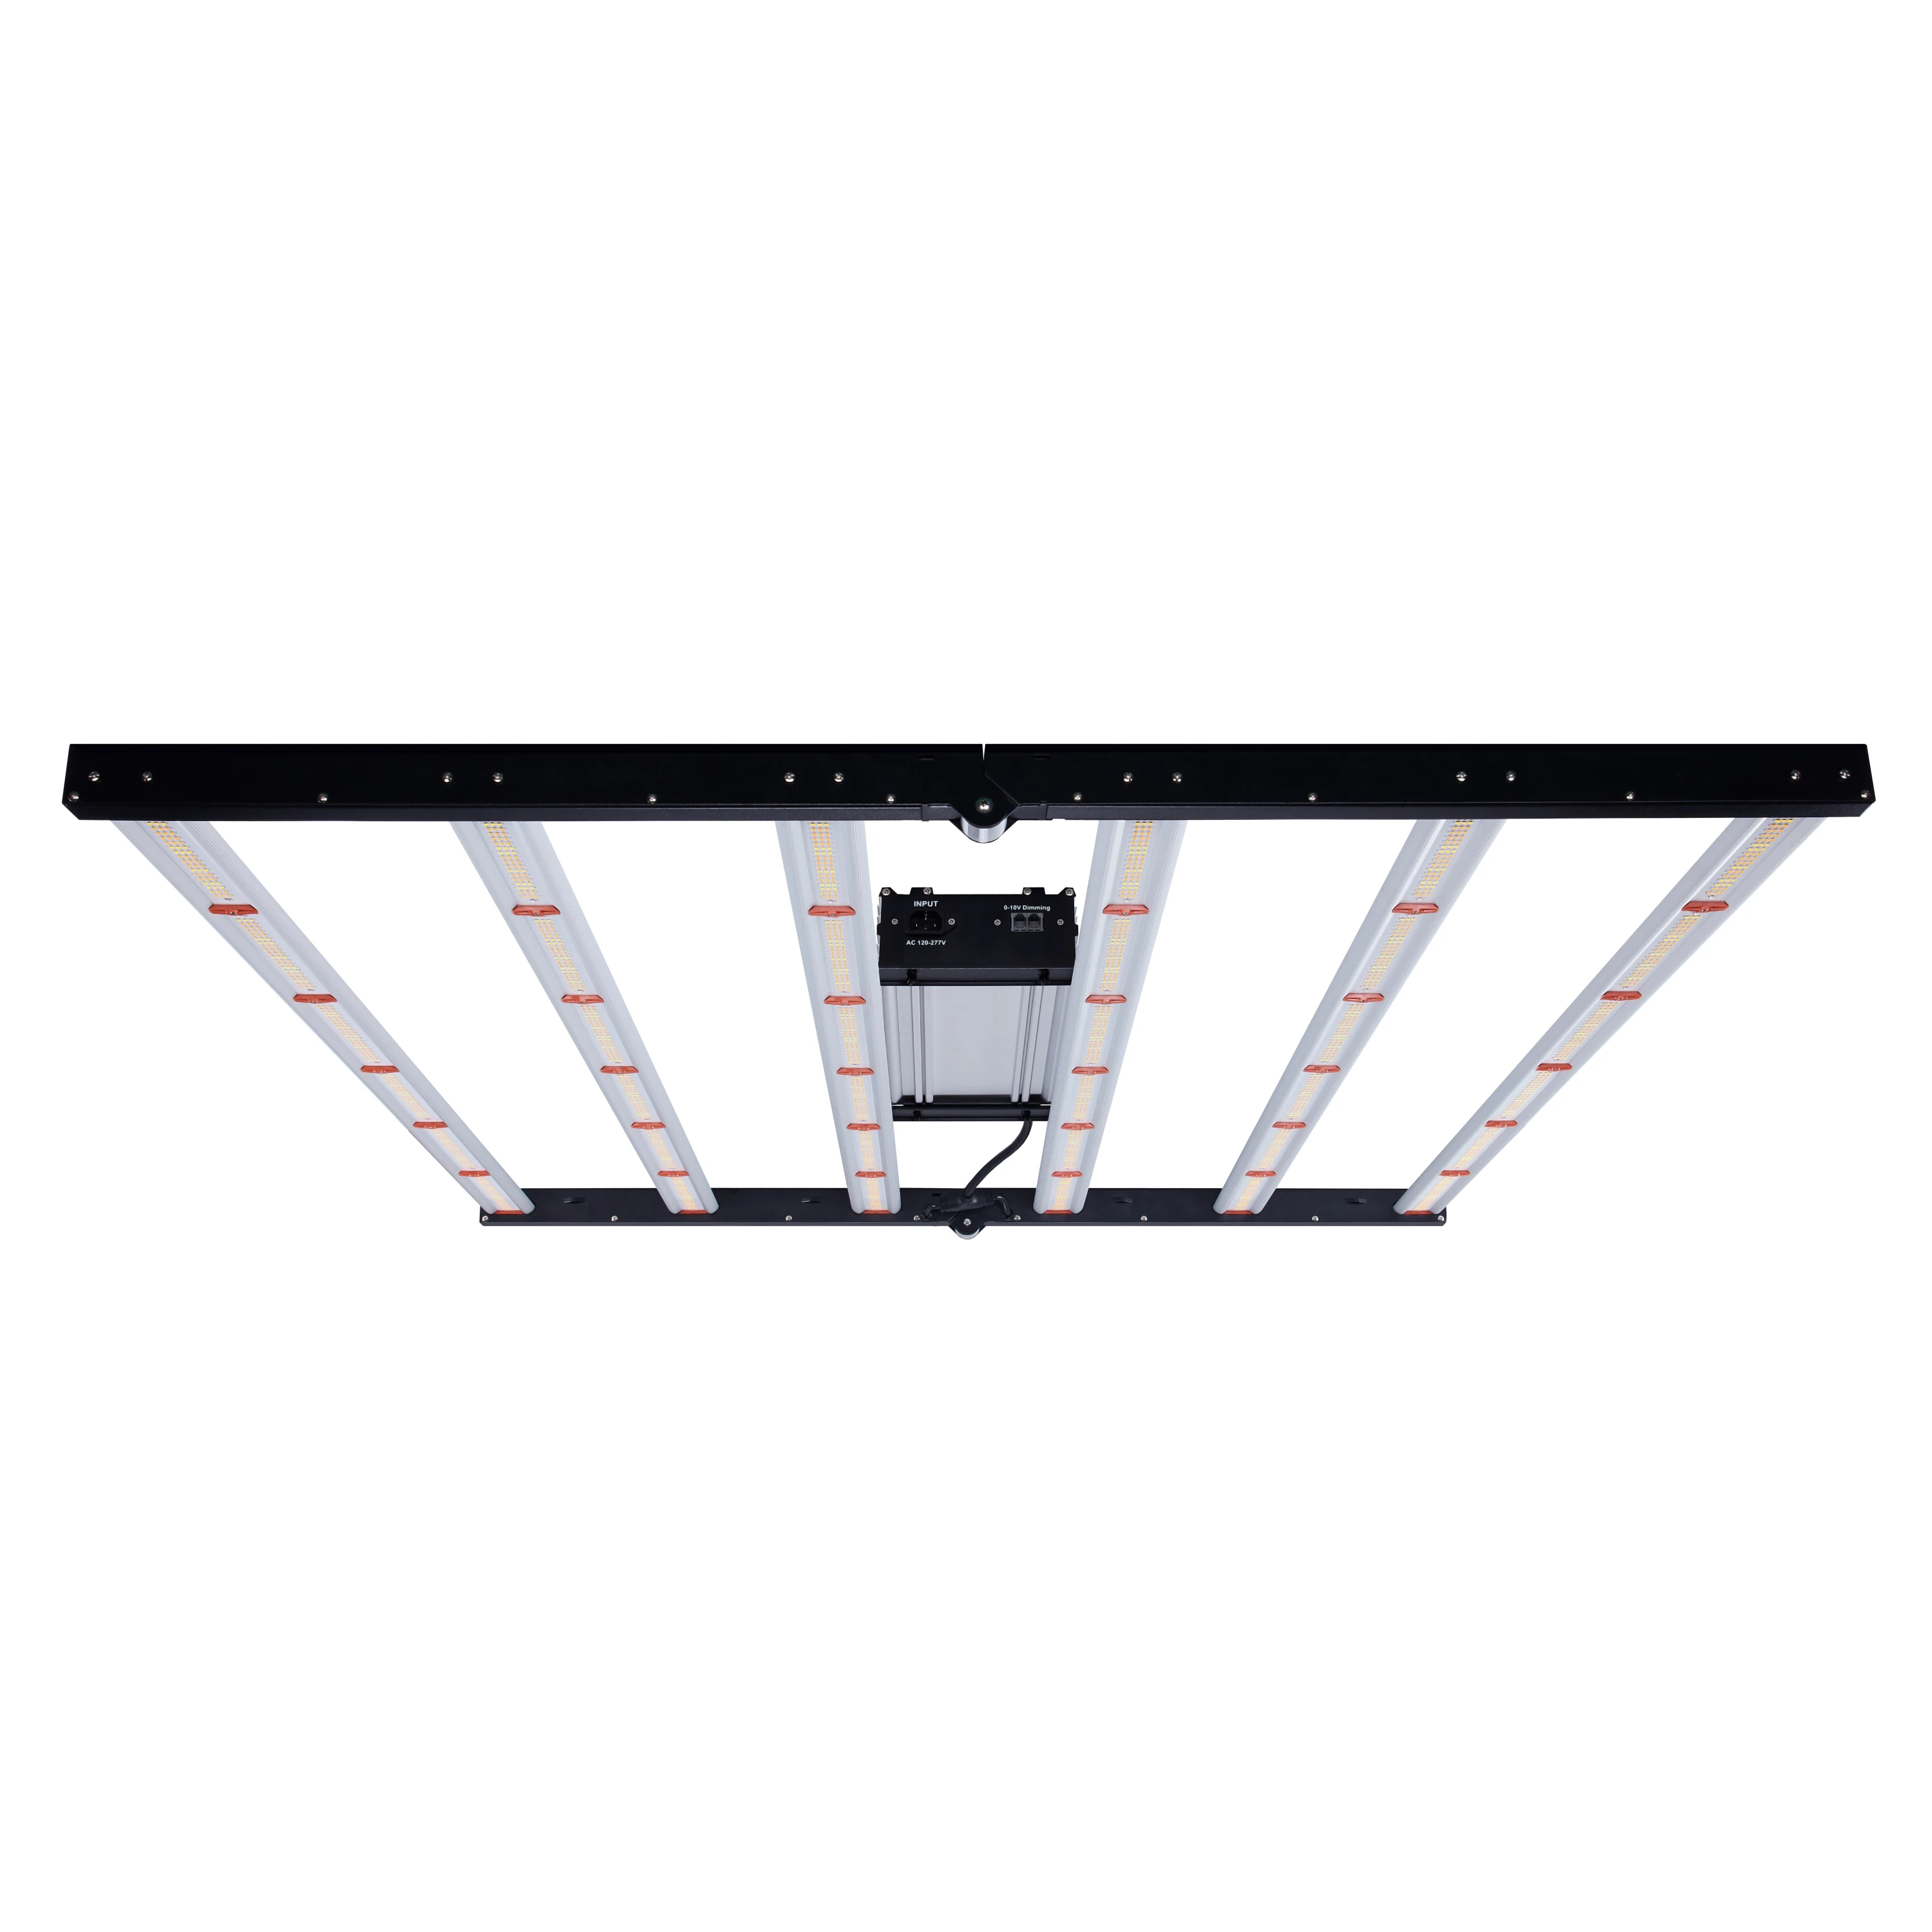 DLC Approved Efficacy Higher Than Gavita Pro 1700e and Fluence SPYDR 630W led grow light